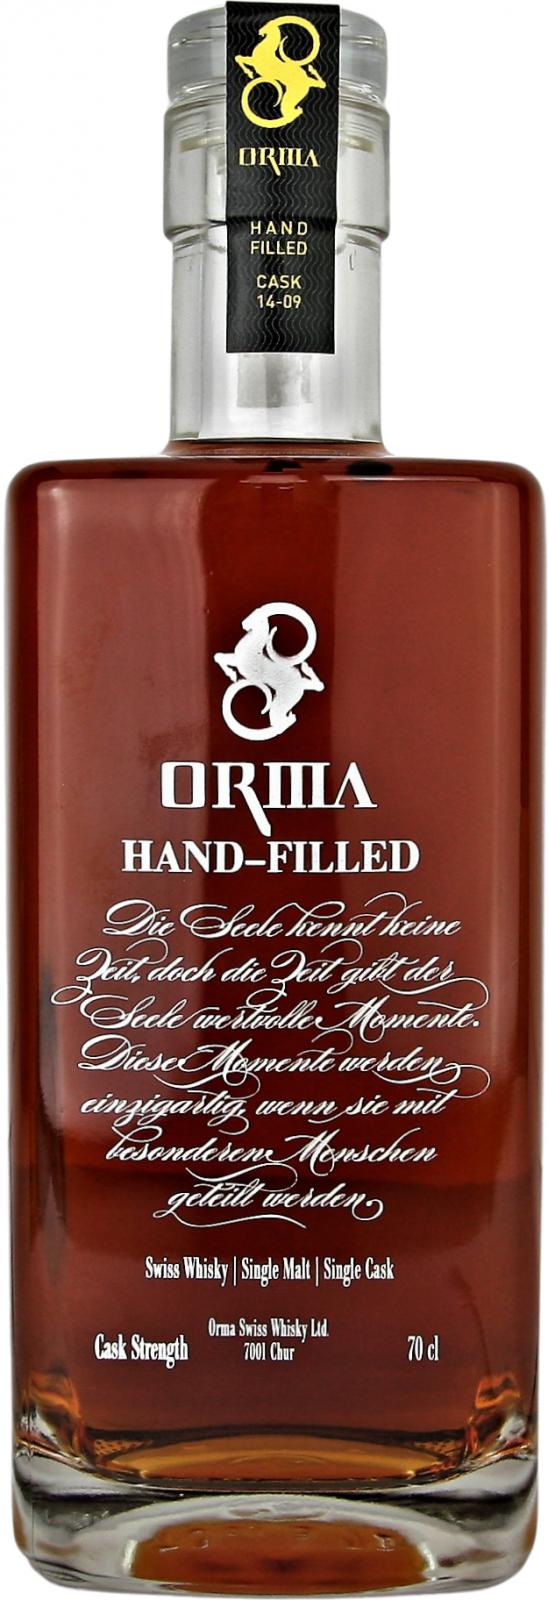 Orma CASK 14-09 Hand-Filled 53.8% 700ml